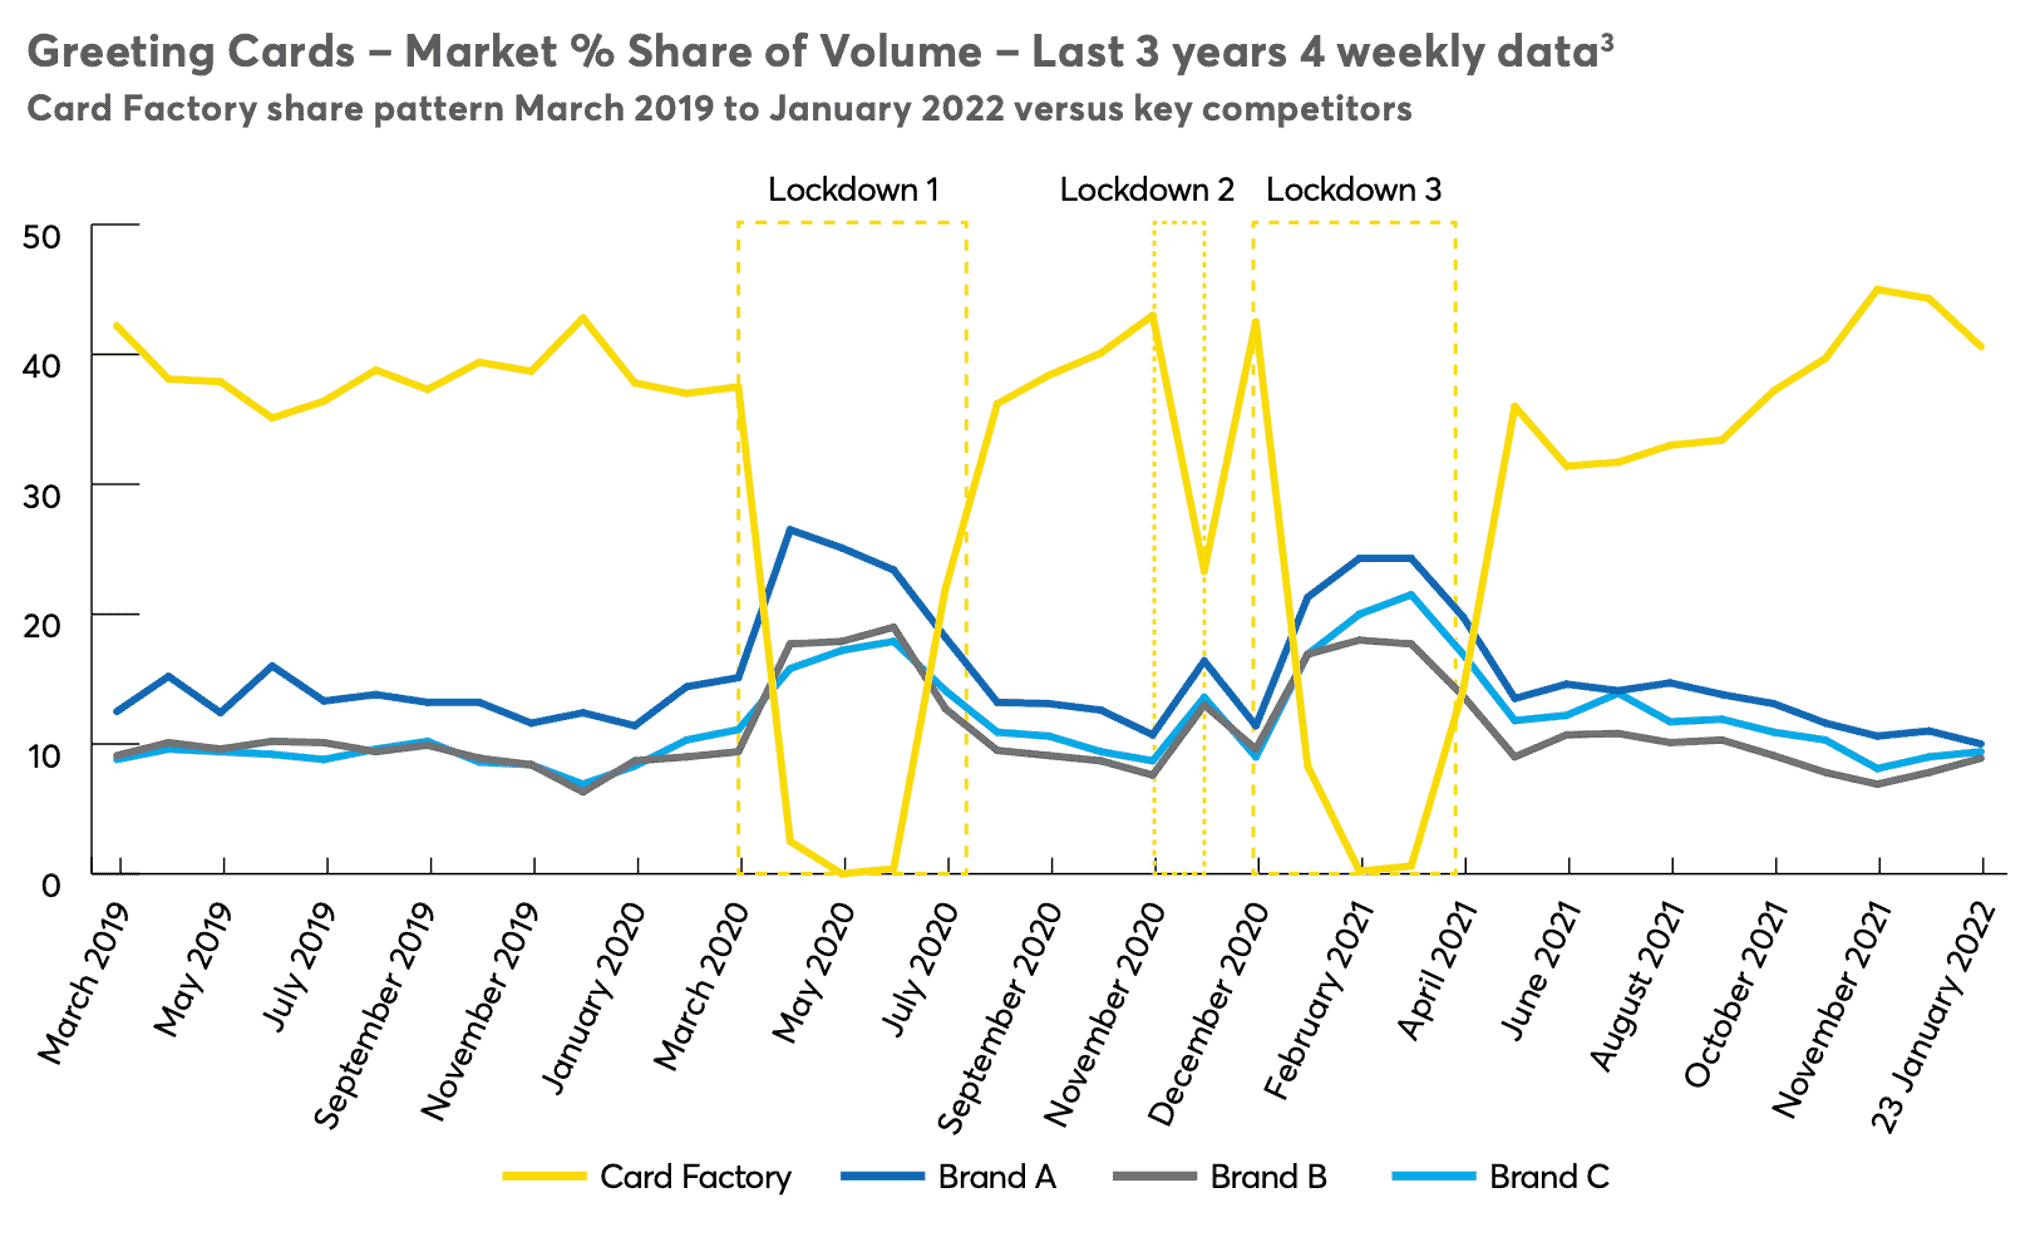 A line chart showing Card Factory greeting card market share by volume from March 2019 to january 2022, there are large reductions in market share corresponding to the three lockdowns that were imposed in the UK to combat the spread of coronavirus